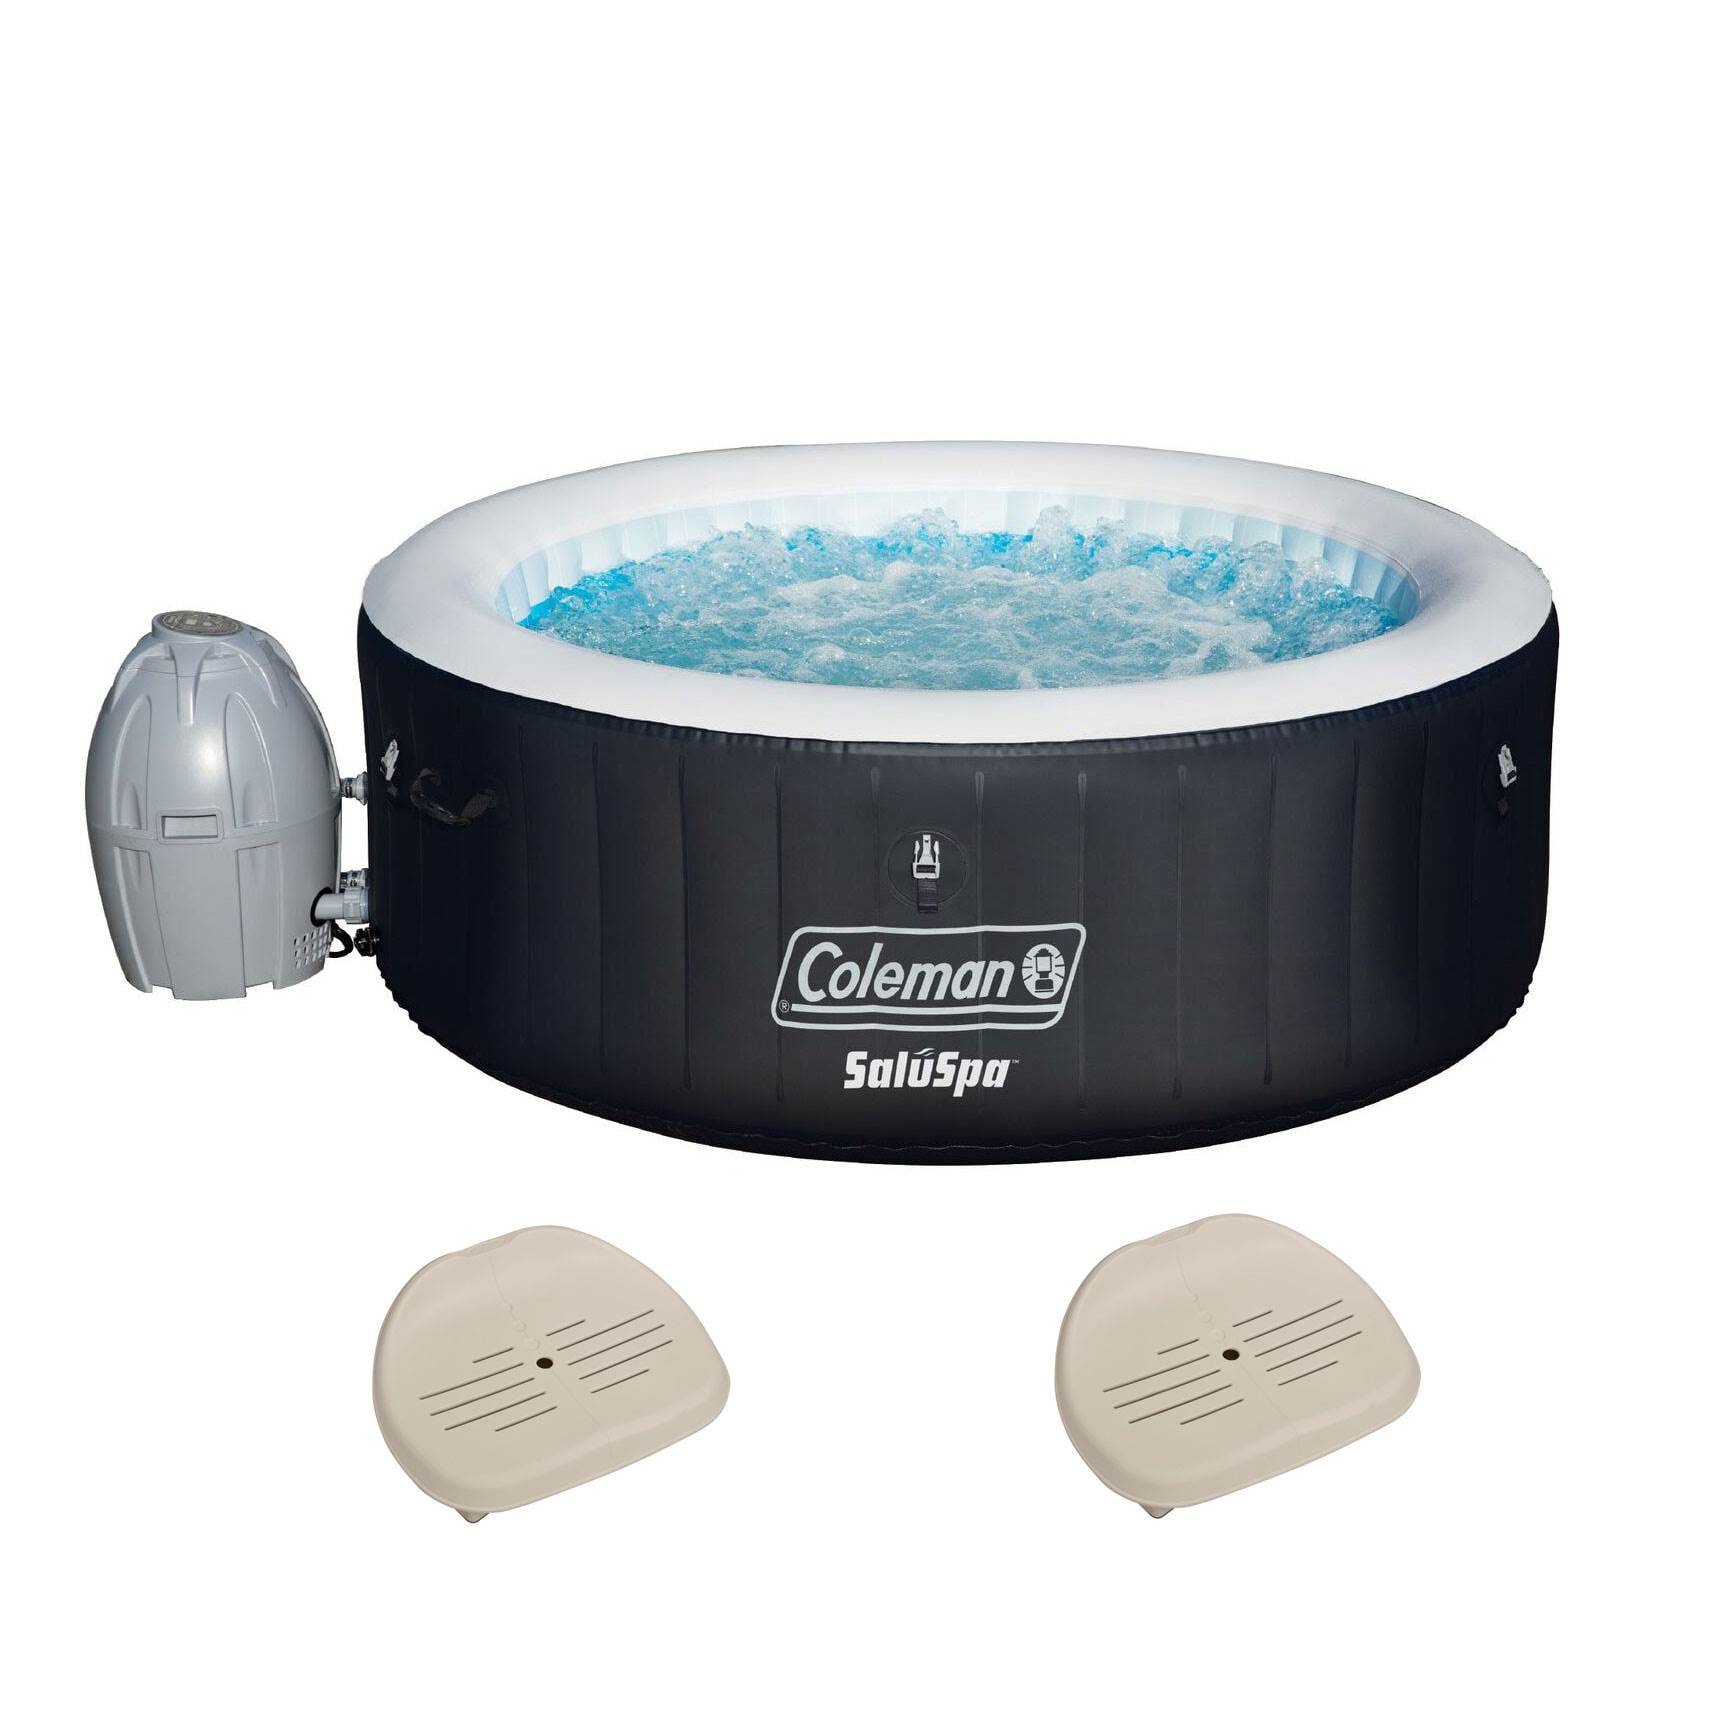 CO-Z 4 Person Portable Inflatable Hot Tub Spa w 120 Massage Jet & Pump &  Cover